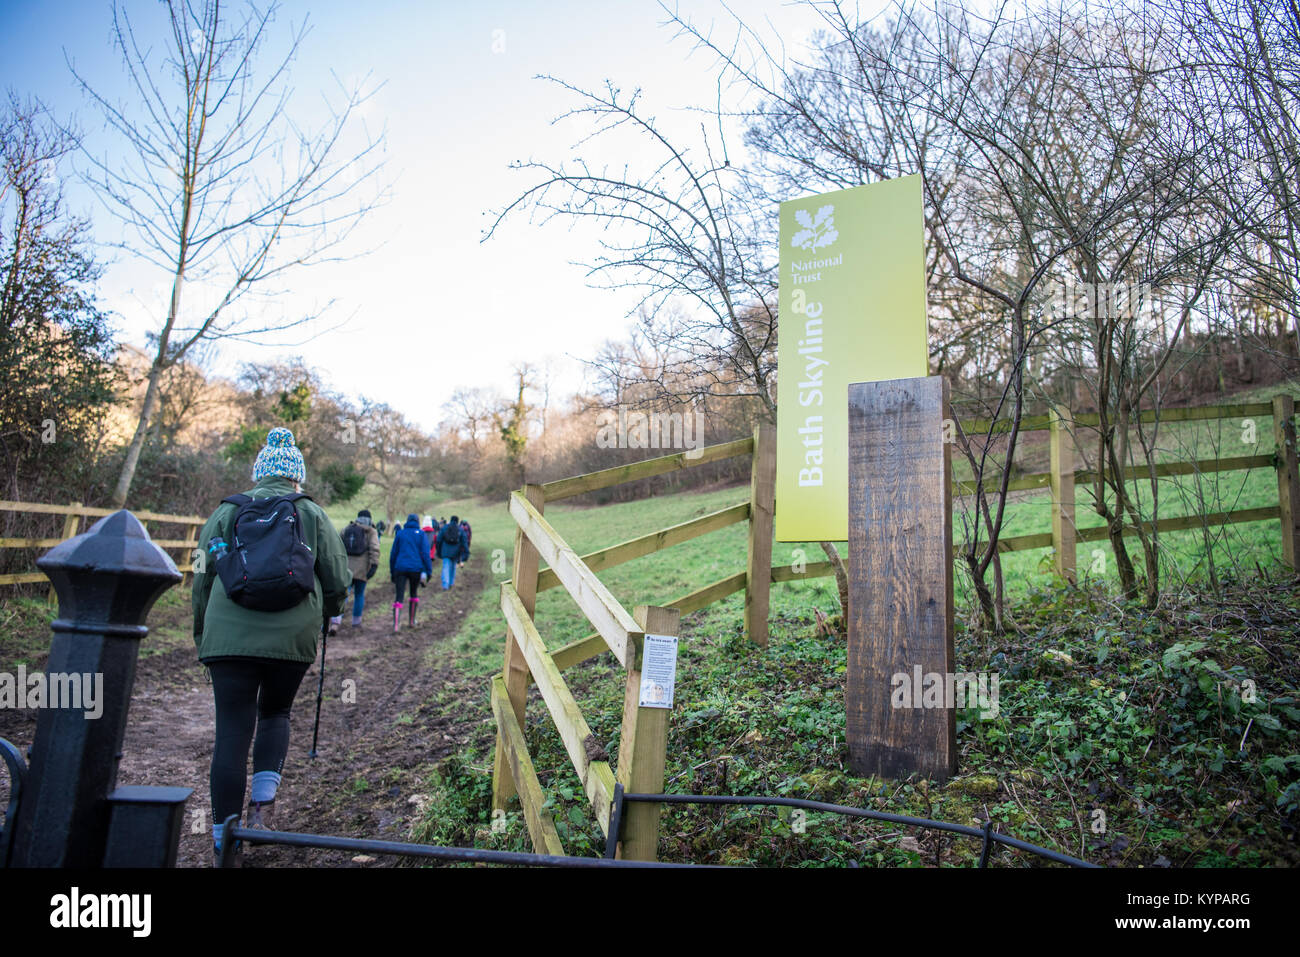 A group of walkers on a winter ramble across Bath's beautiful Skyline walking past a National Trust sign Stock Photo